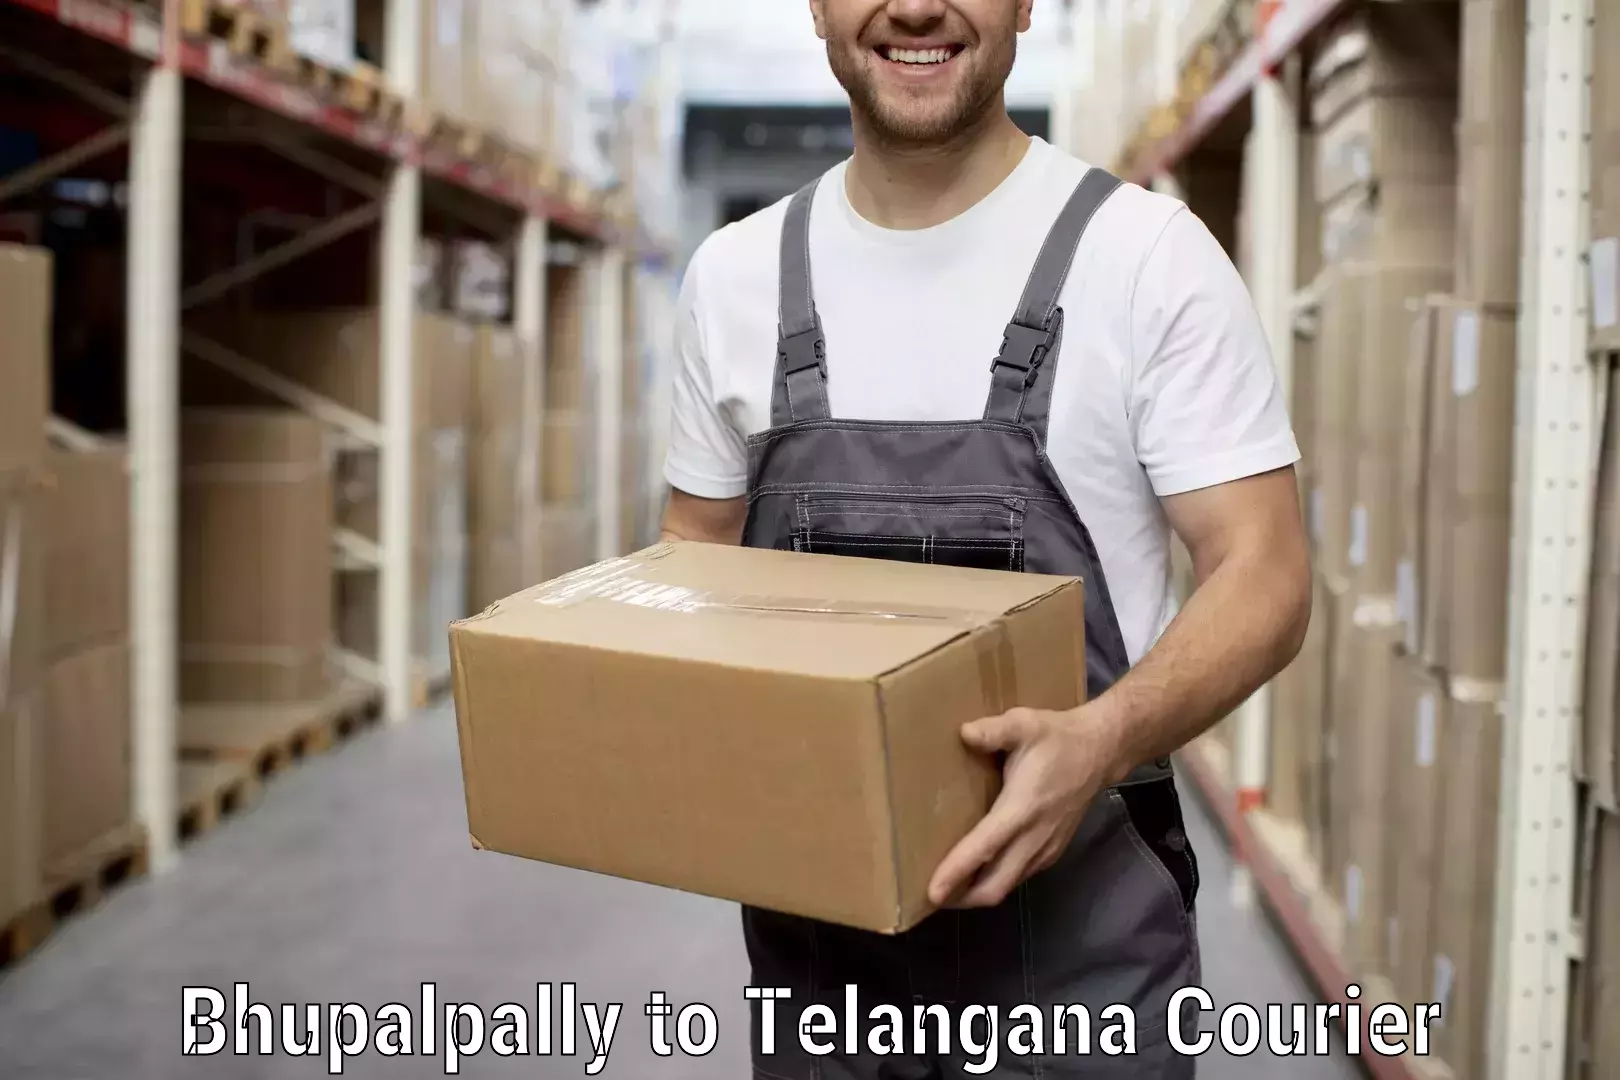 Furniture transport experts Bhupalpally to Danthalapally